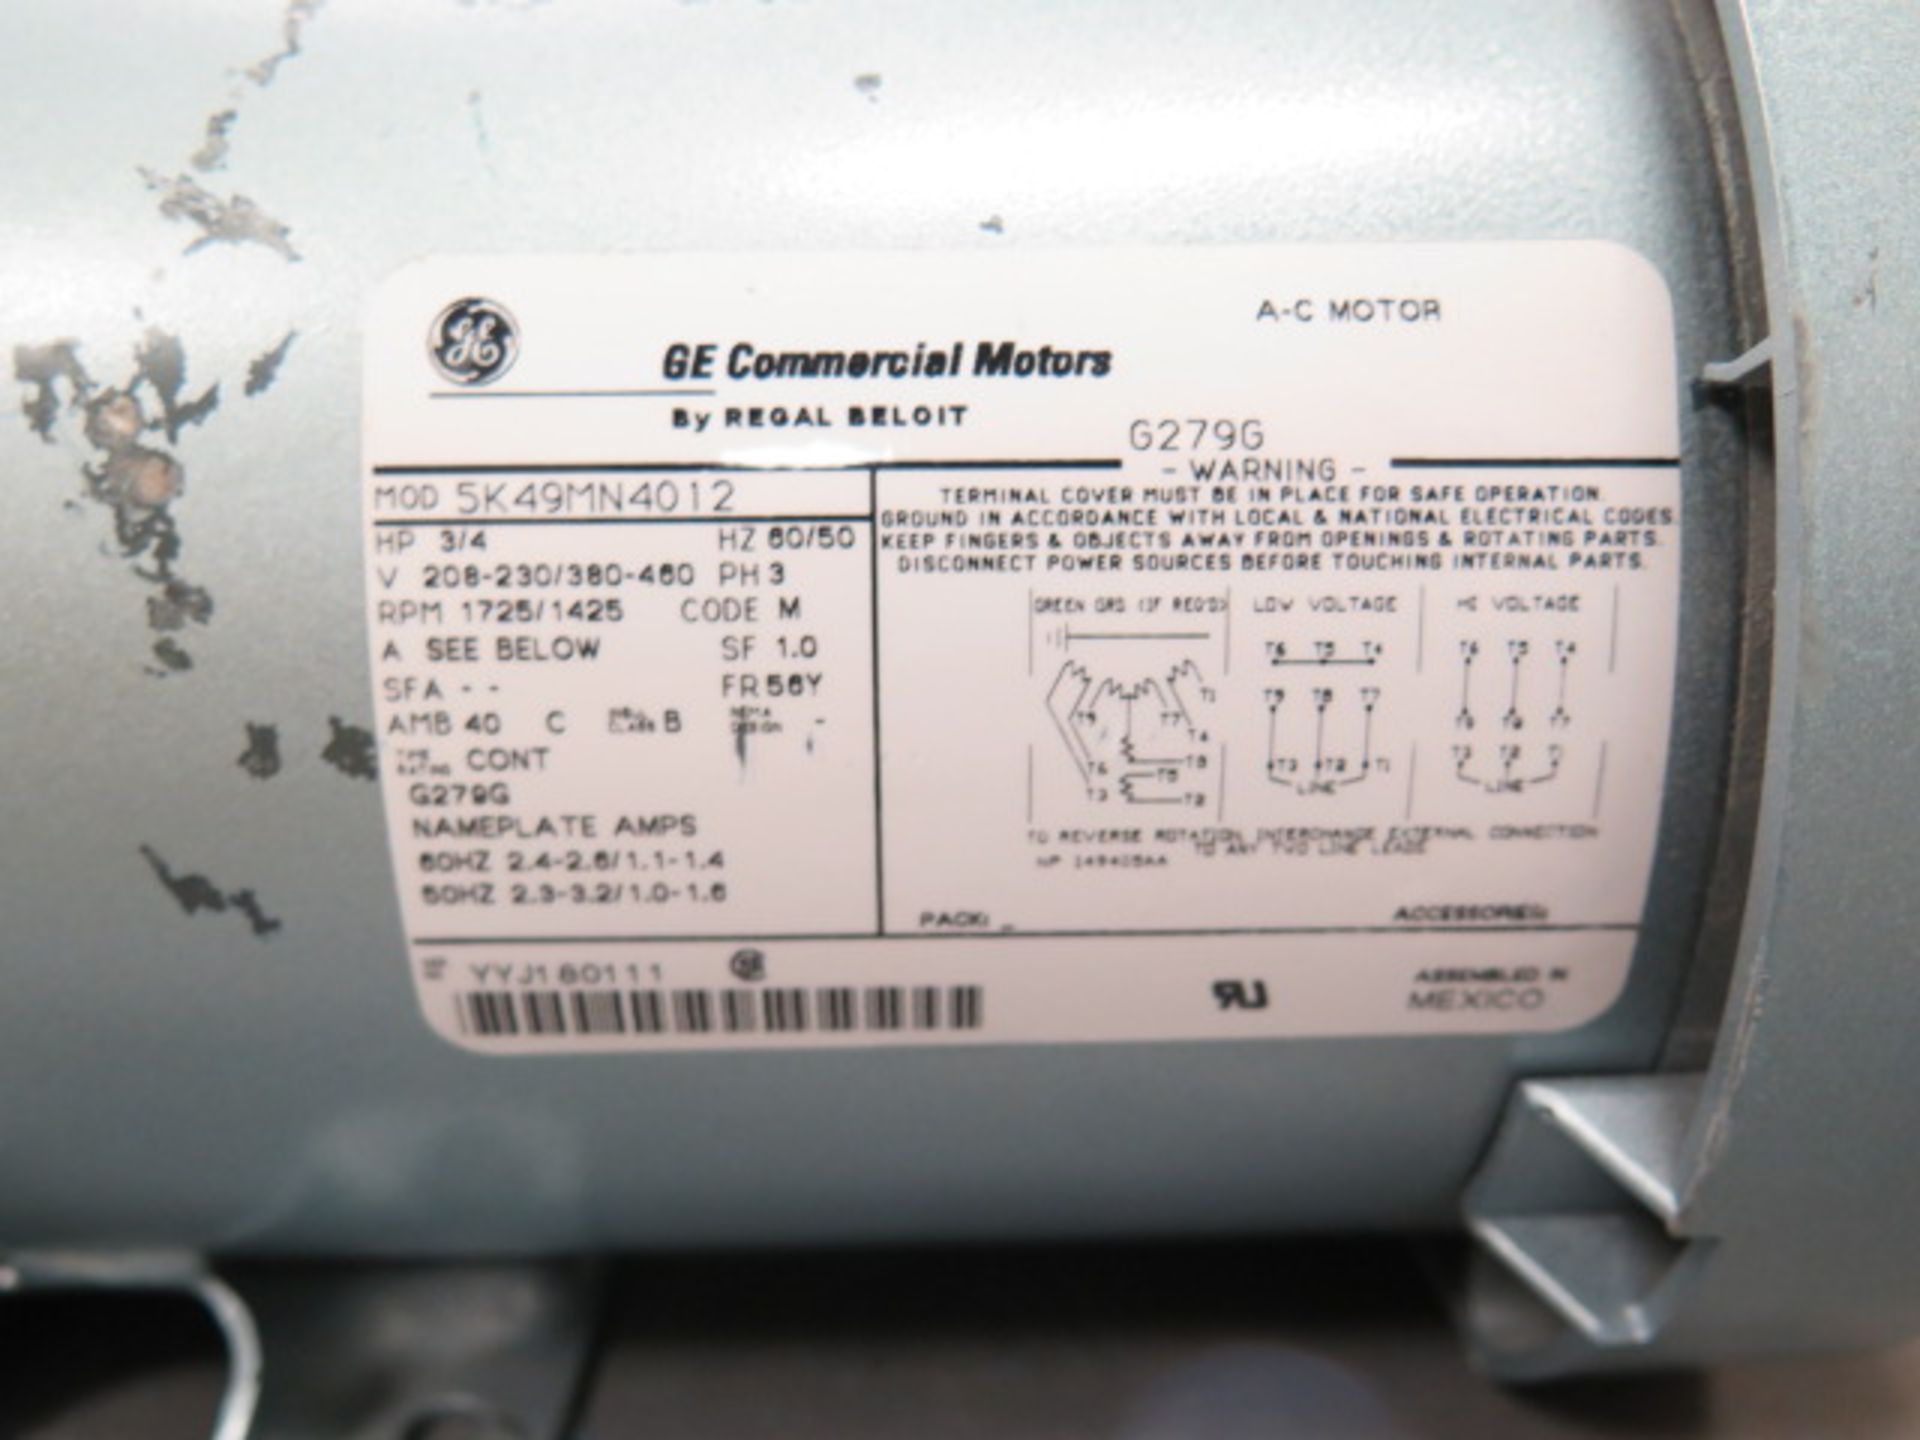 Gast mdl. 1023-101Q-G279 Vacuum Pumps (3) 3/4Hp 208-230/380-460V (SOLD AS-IS - NO WARRANTY) - Image 4 of 5